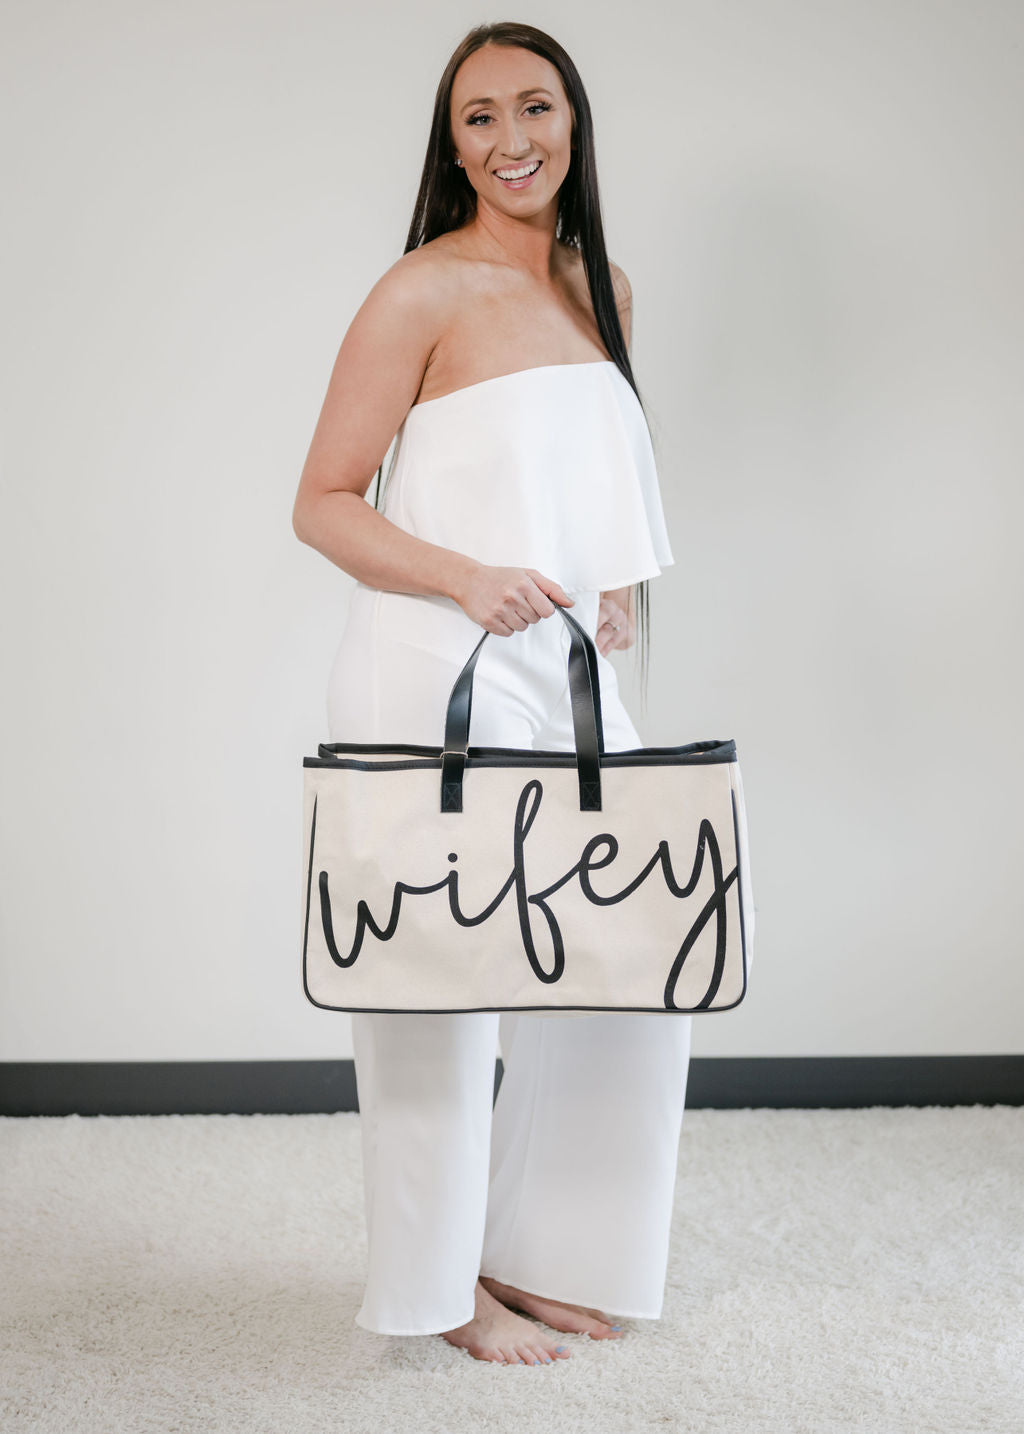 Wifey Canvas Tote